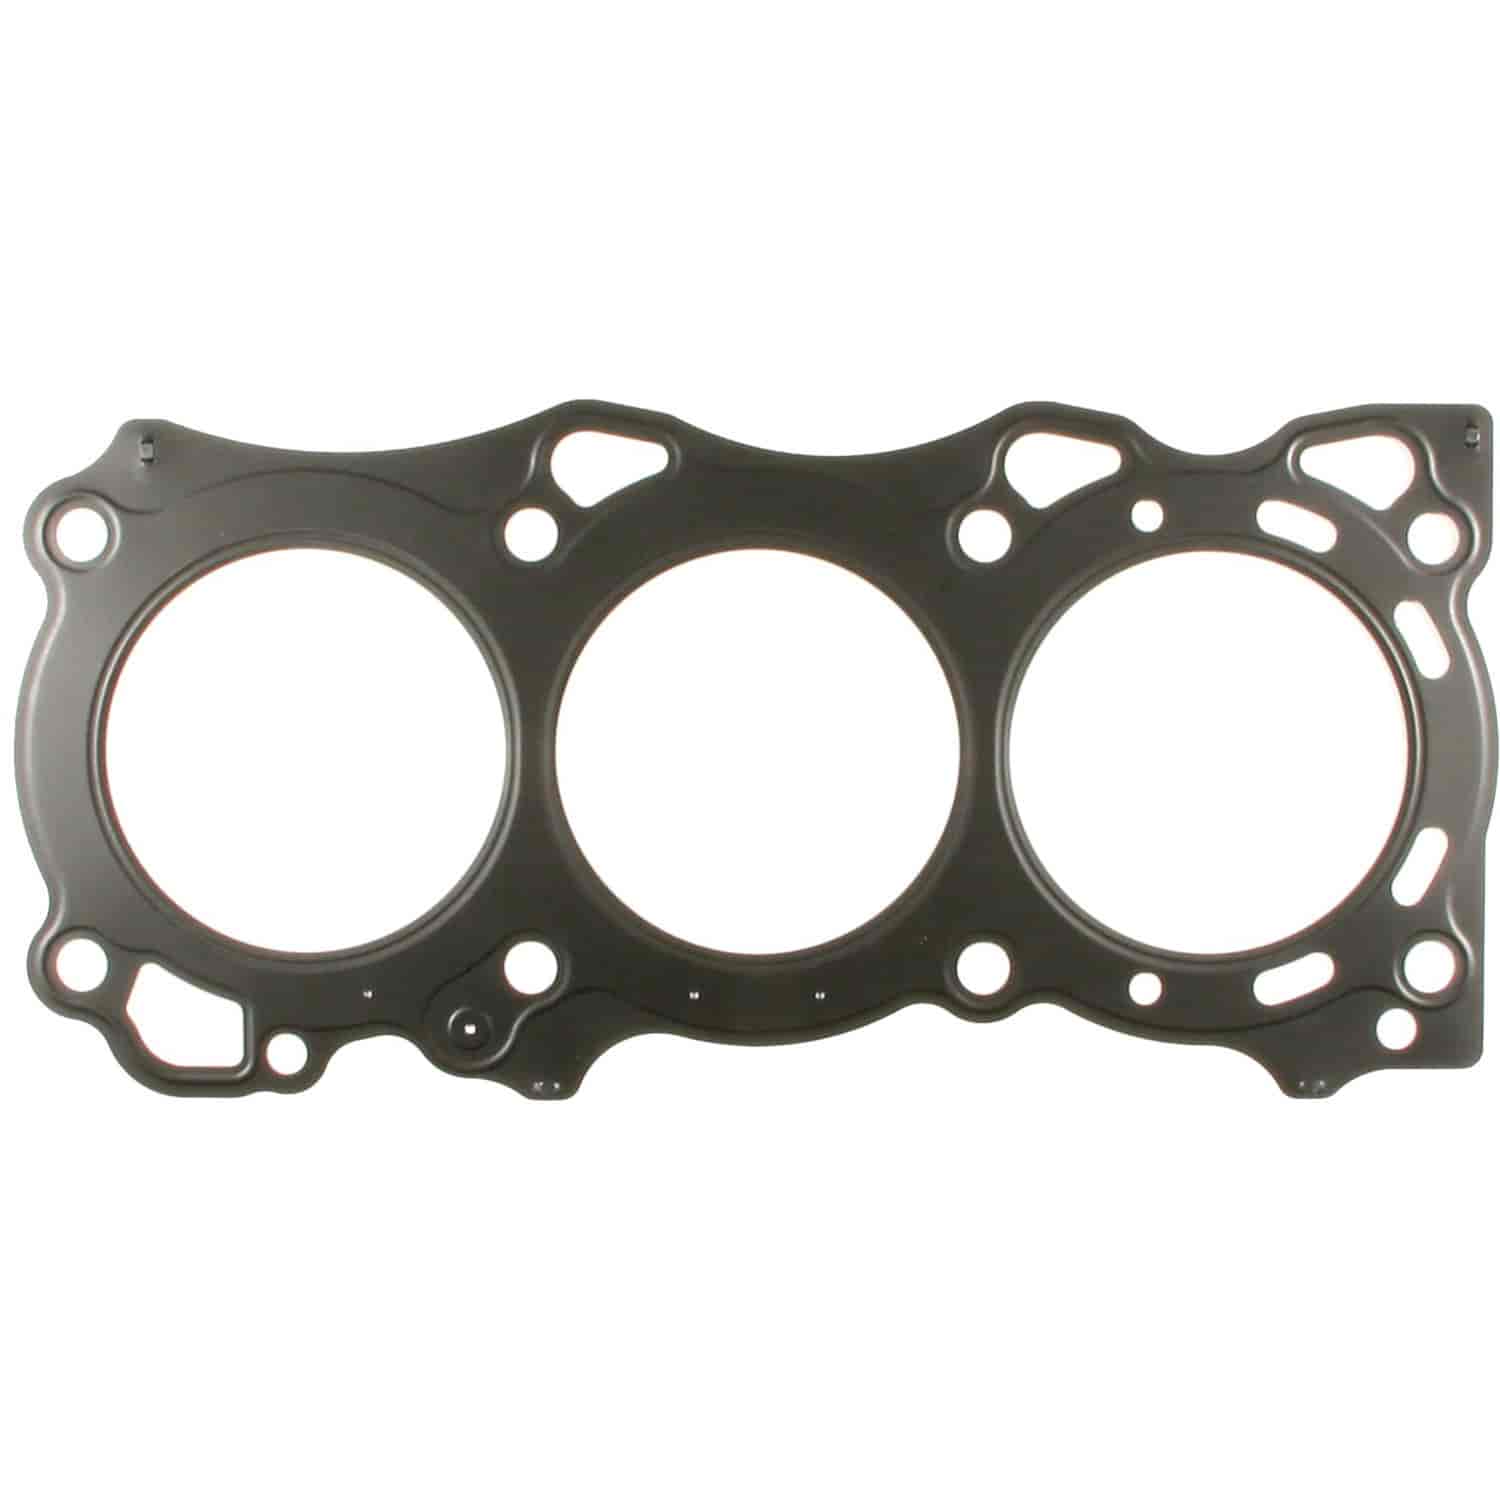 Cylinder Head Gasket Right for Nissan-Pass 3.5L VQ35DE 2003-2004 350Z for Nissan TRUCK 4.0L 2005-2010